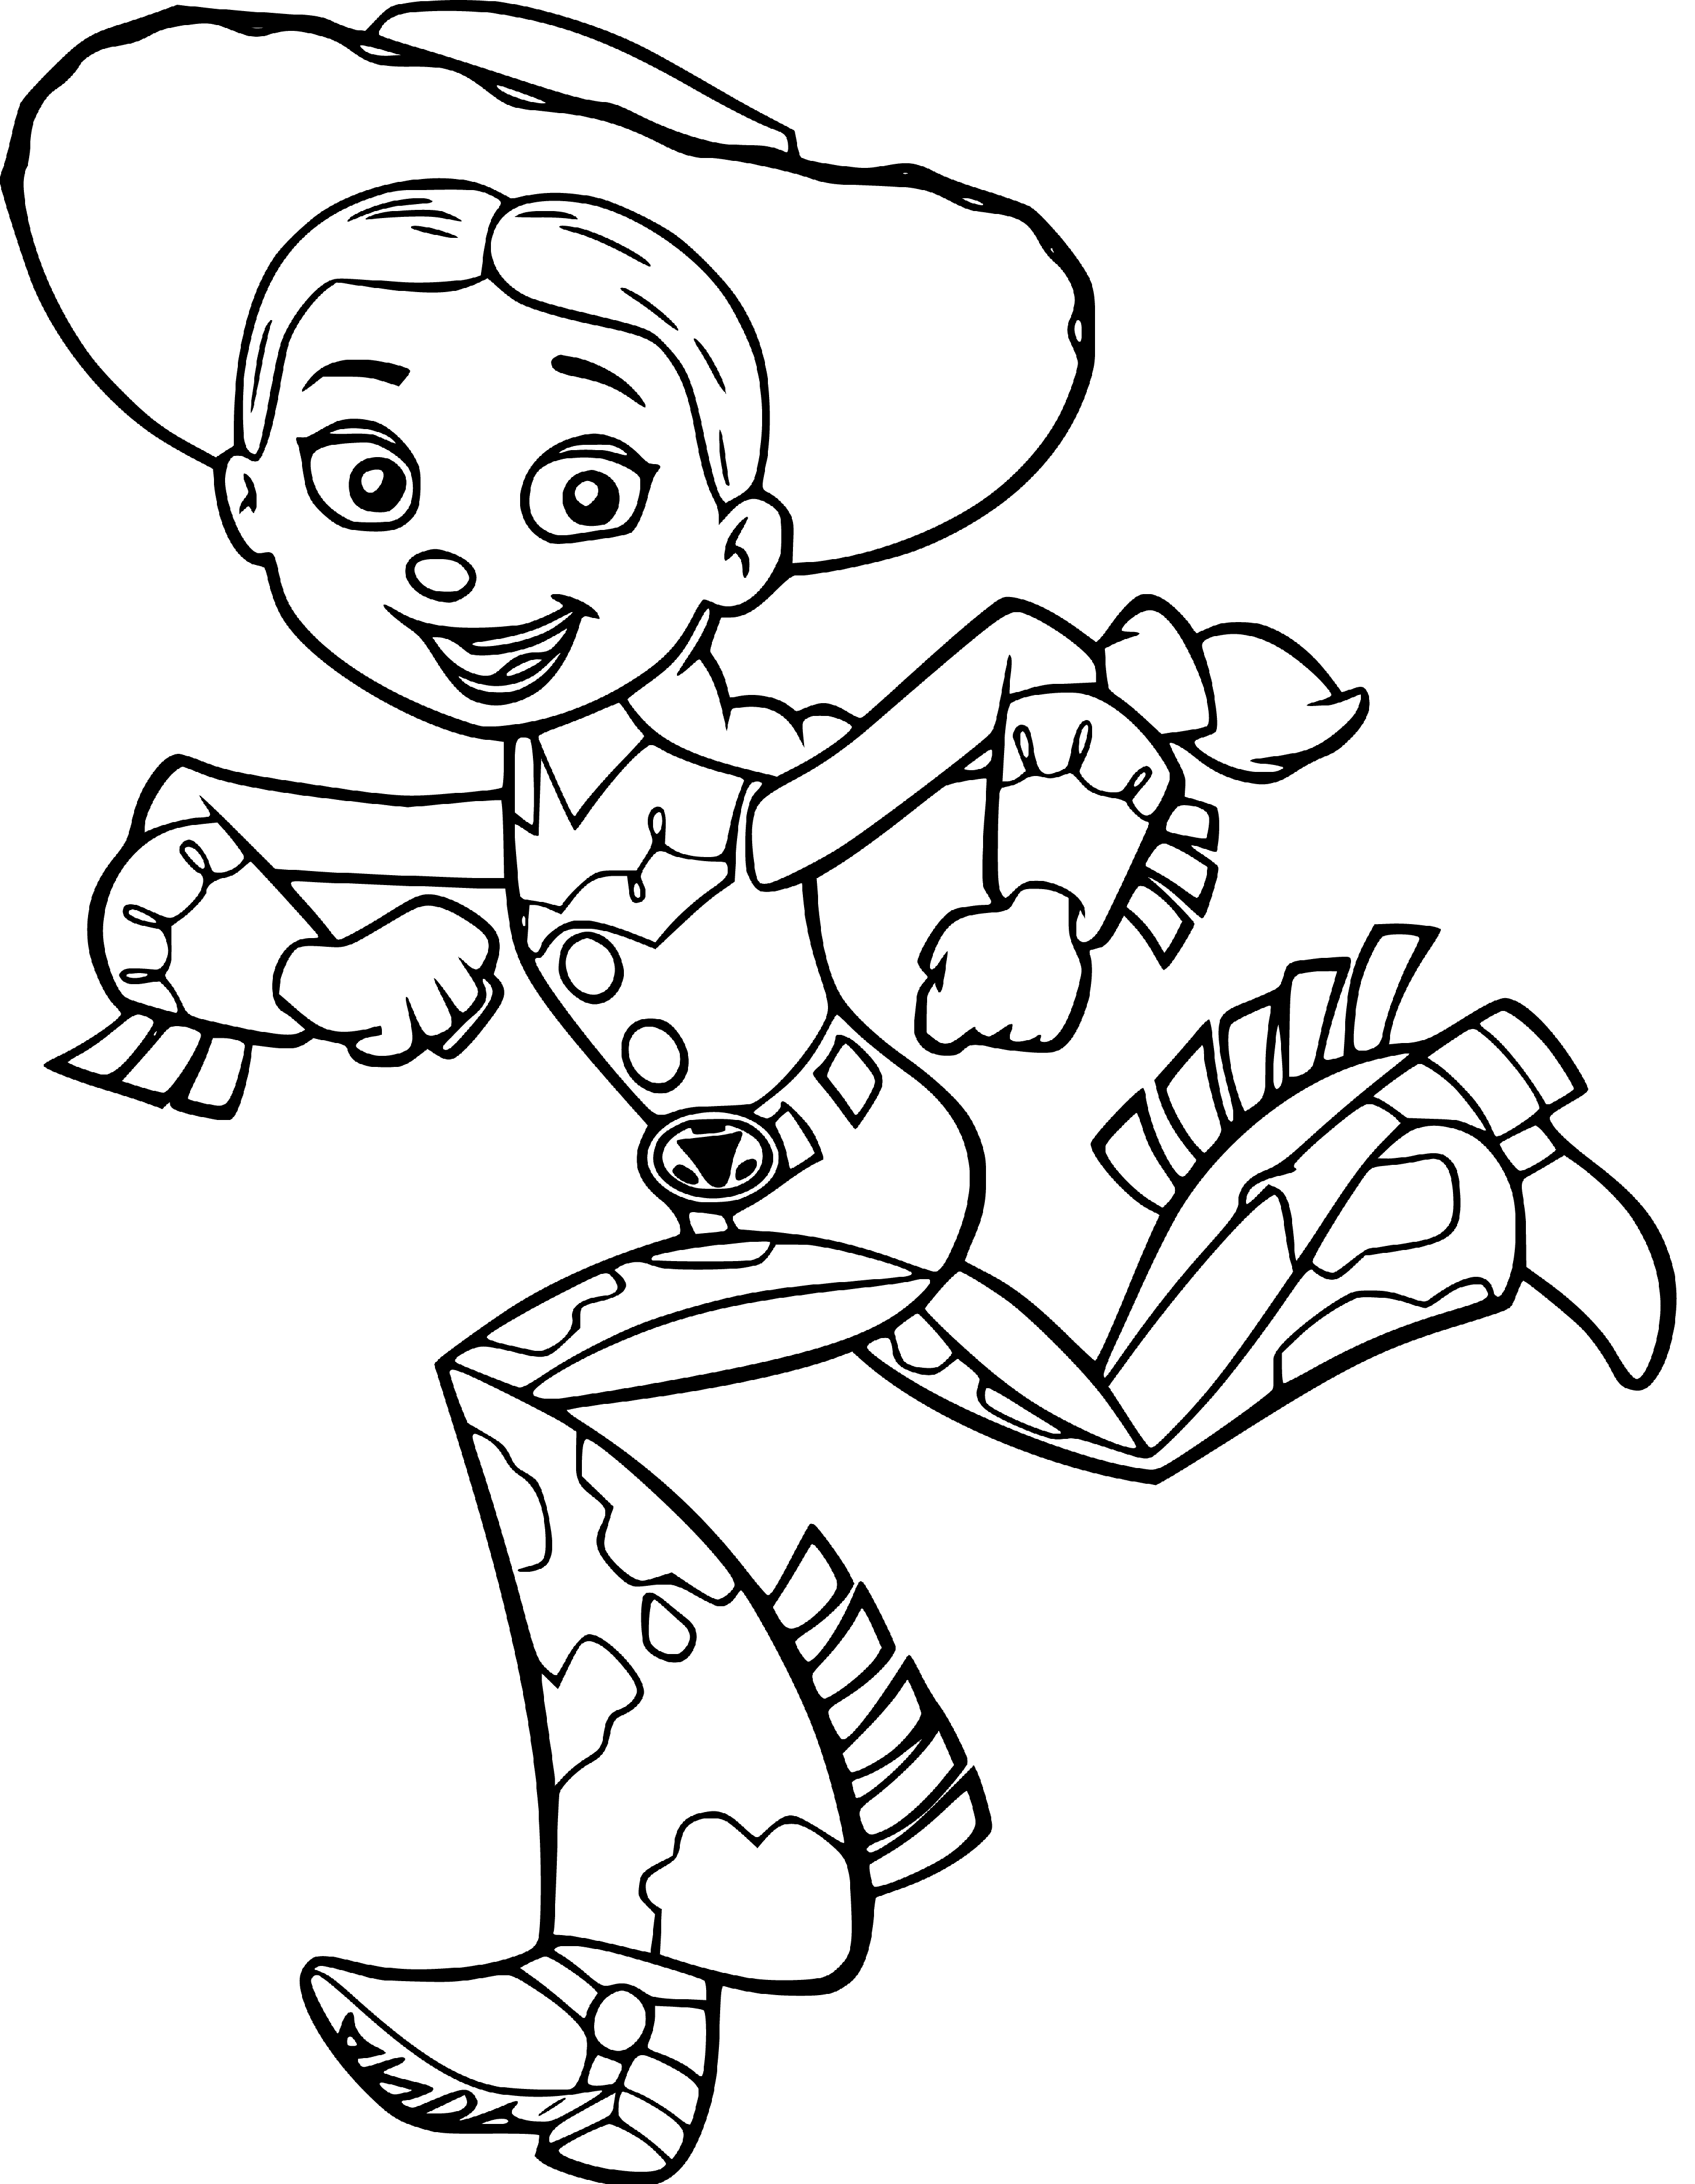 Printable Jessie running Coloring Page for kids.